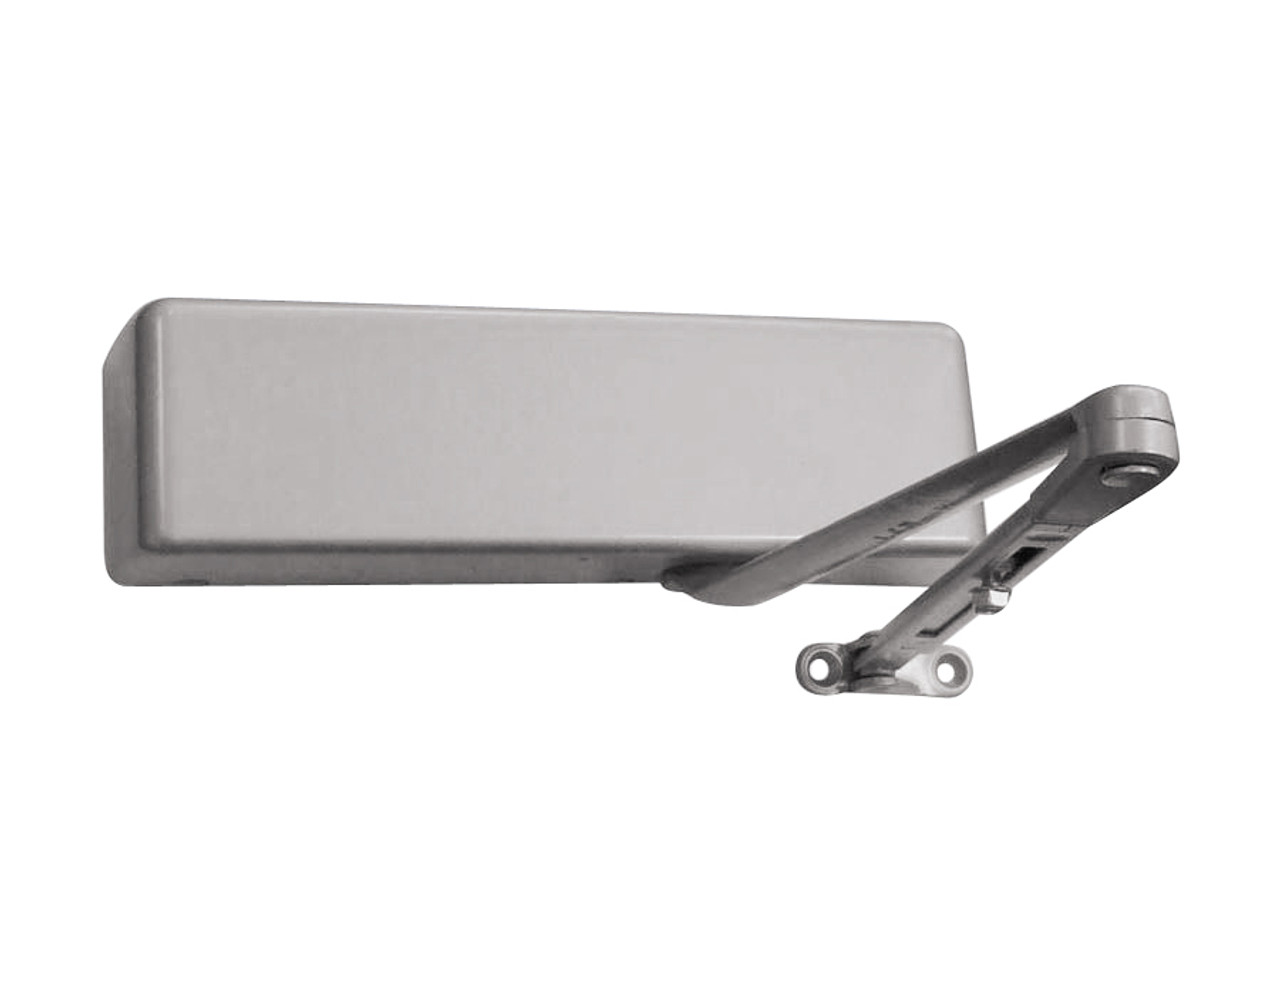 4021-H-LH-US15 LCN Door Closer with Hold Open Arm in Satin Nickel Finish